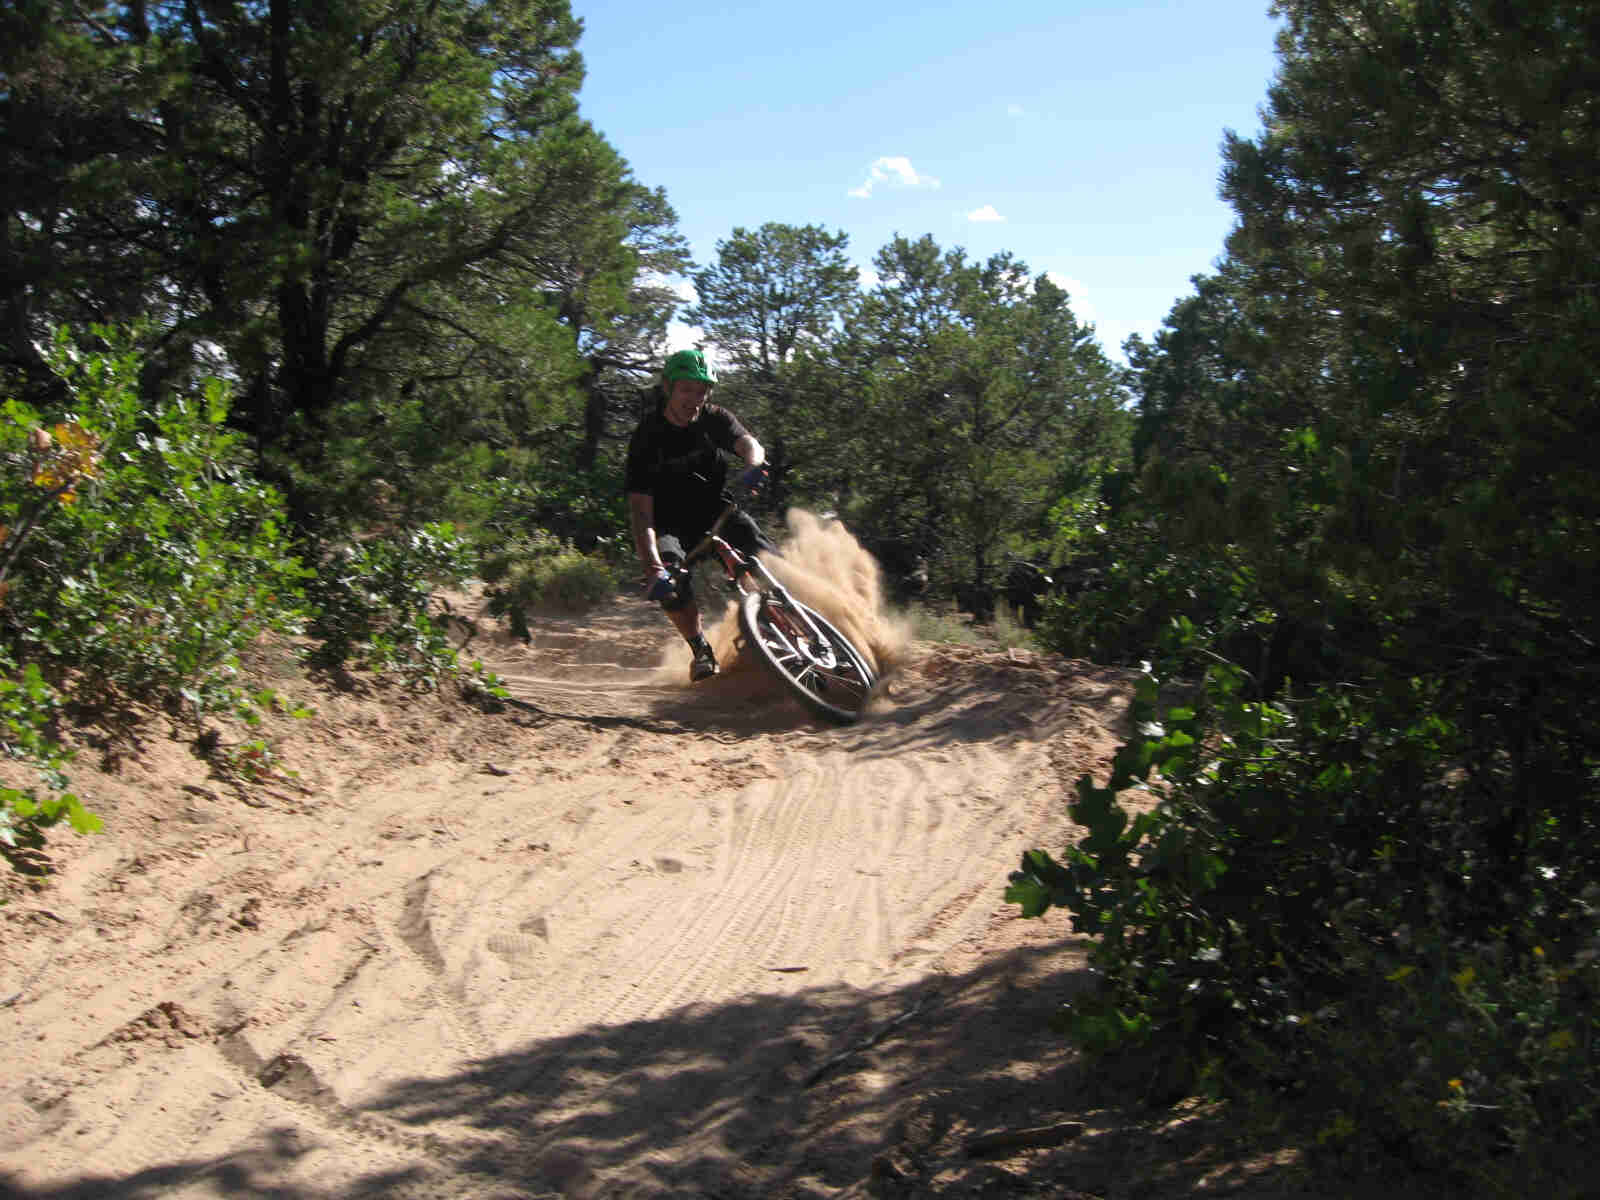 Front view of a cyclist, splashing up sand while rounding a corner on their Surly bike, on a trail with trees around it